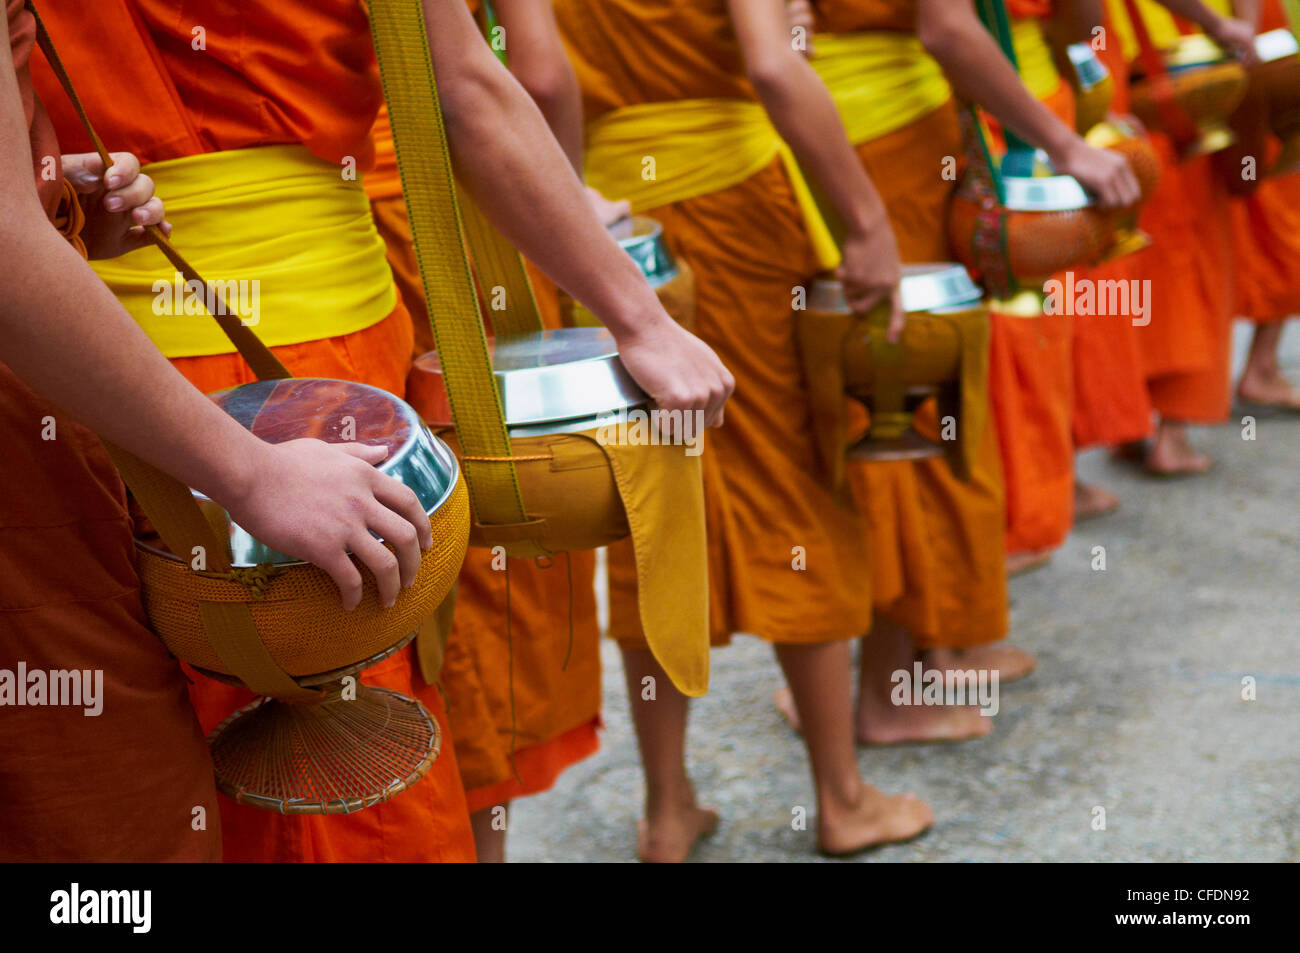 Procession of Buddhist monks collecting alms and rice at dawn, Luang Prabang, Laos, Indochina, Southeast Asia, Asia Stock Photo